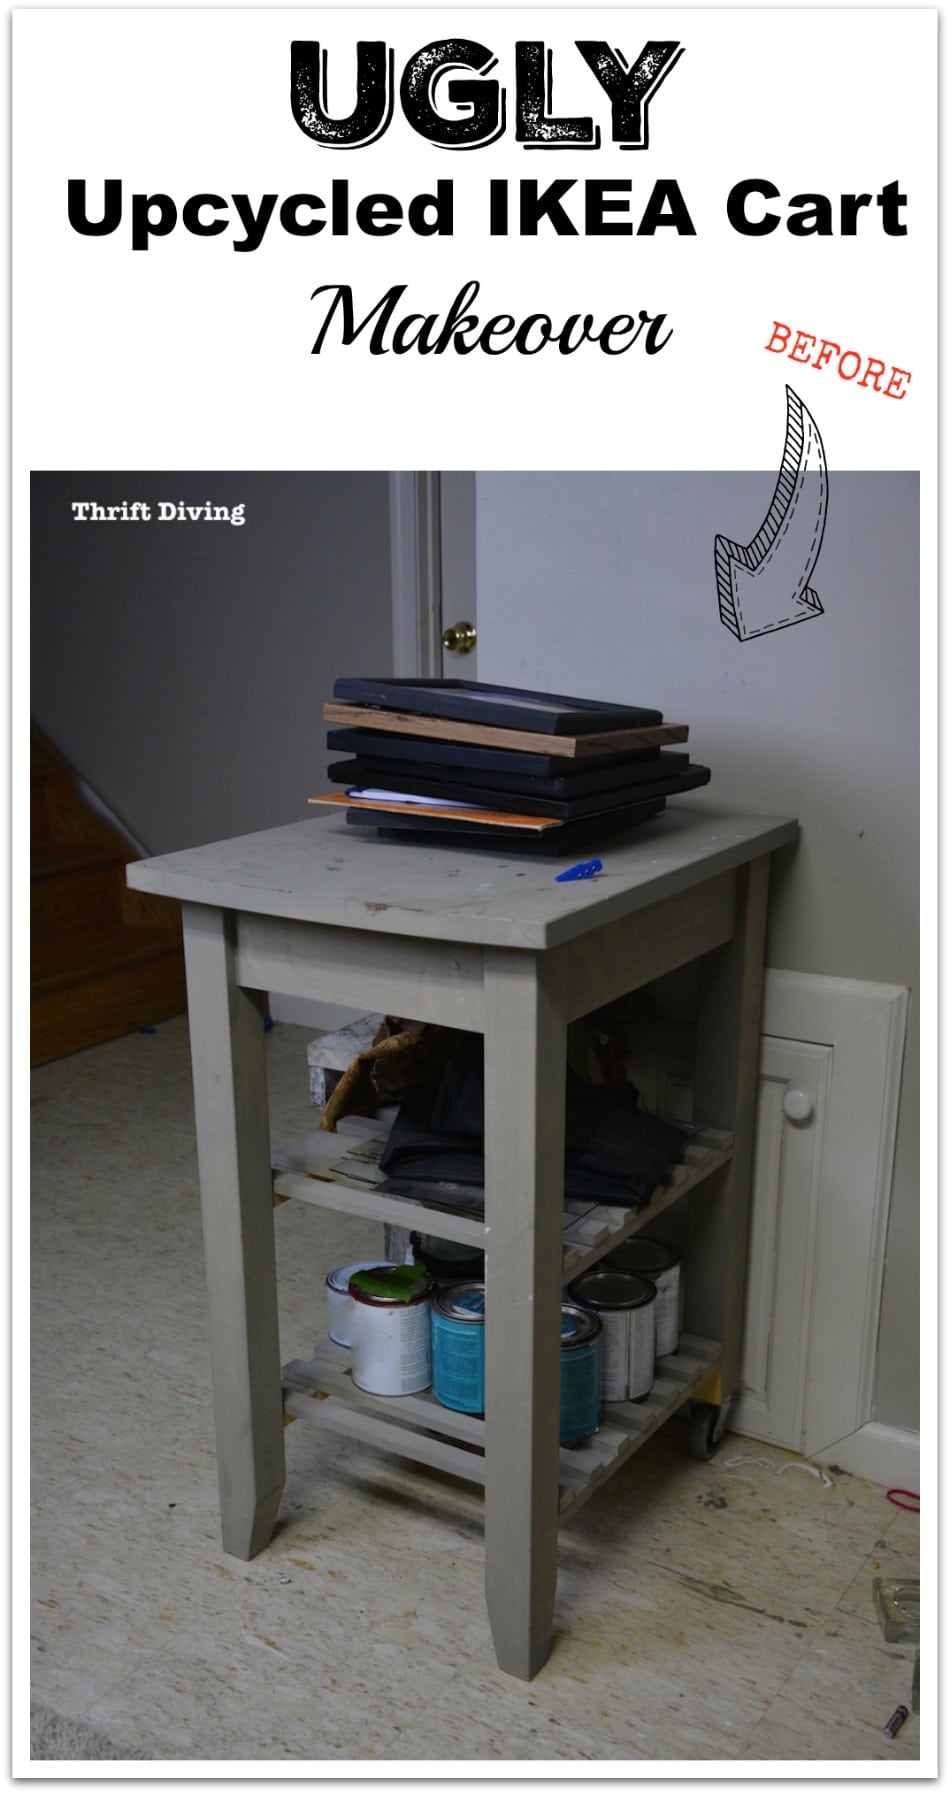 An ugly IKEA Bekvam kitchen cart gets upcycled into something cool for a home office!